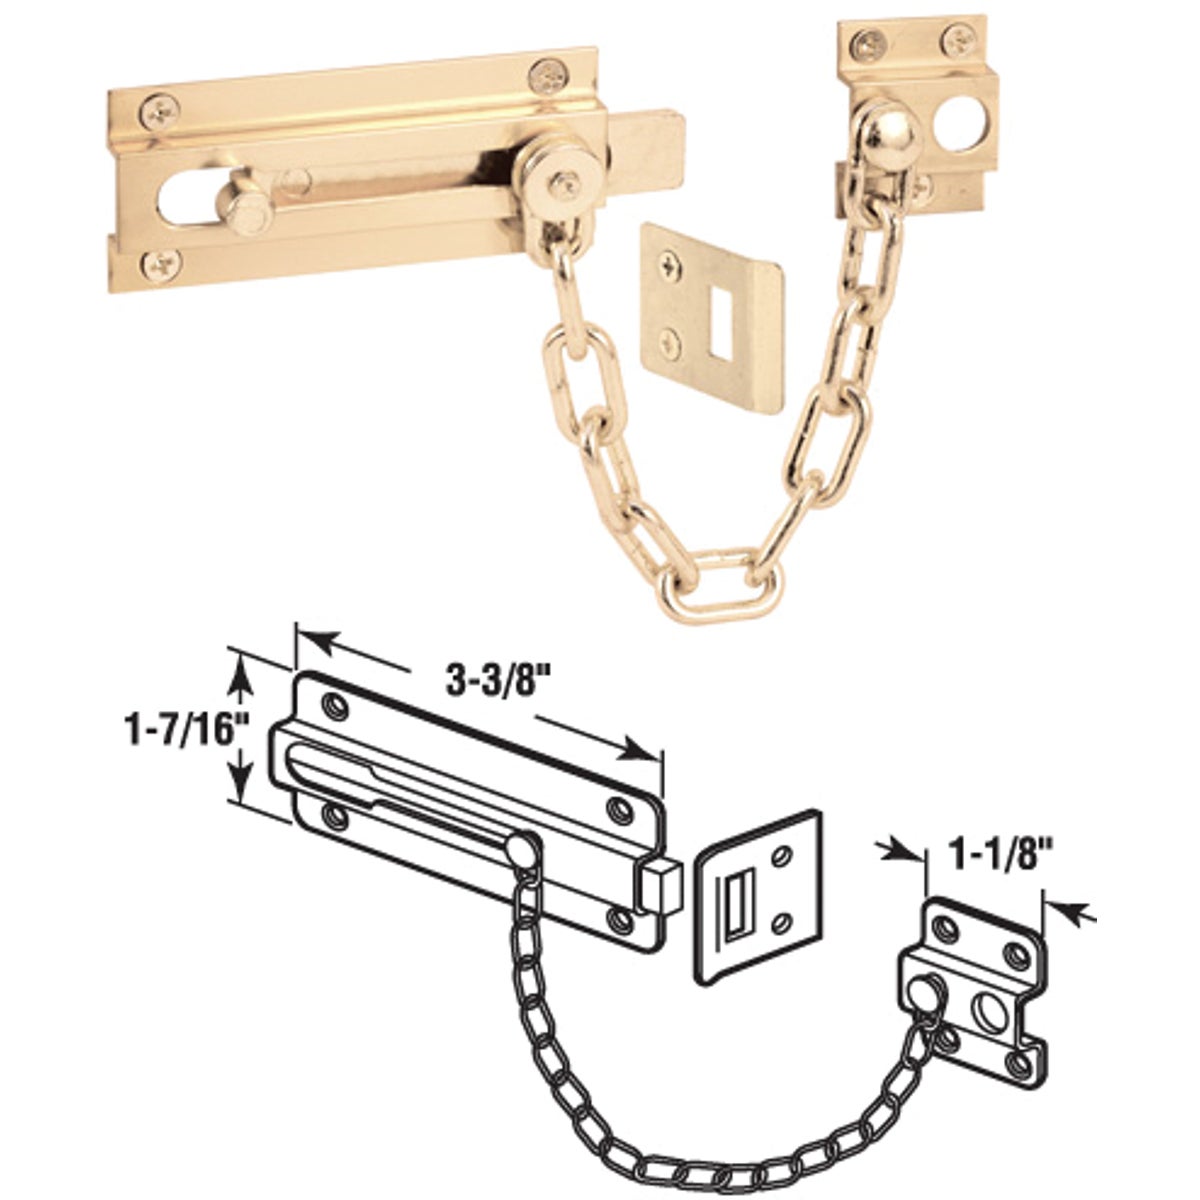 Item 233349, Hand polished brass chain bolt protects against forced entry.